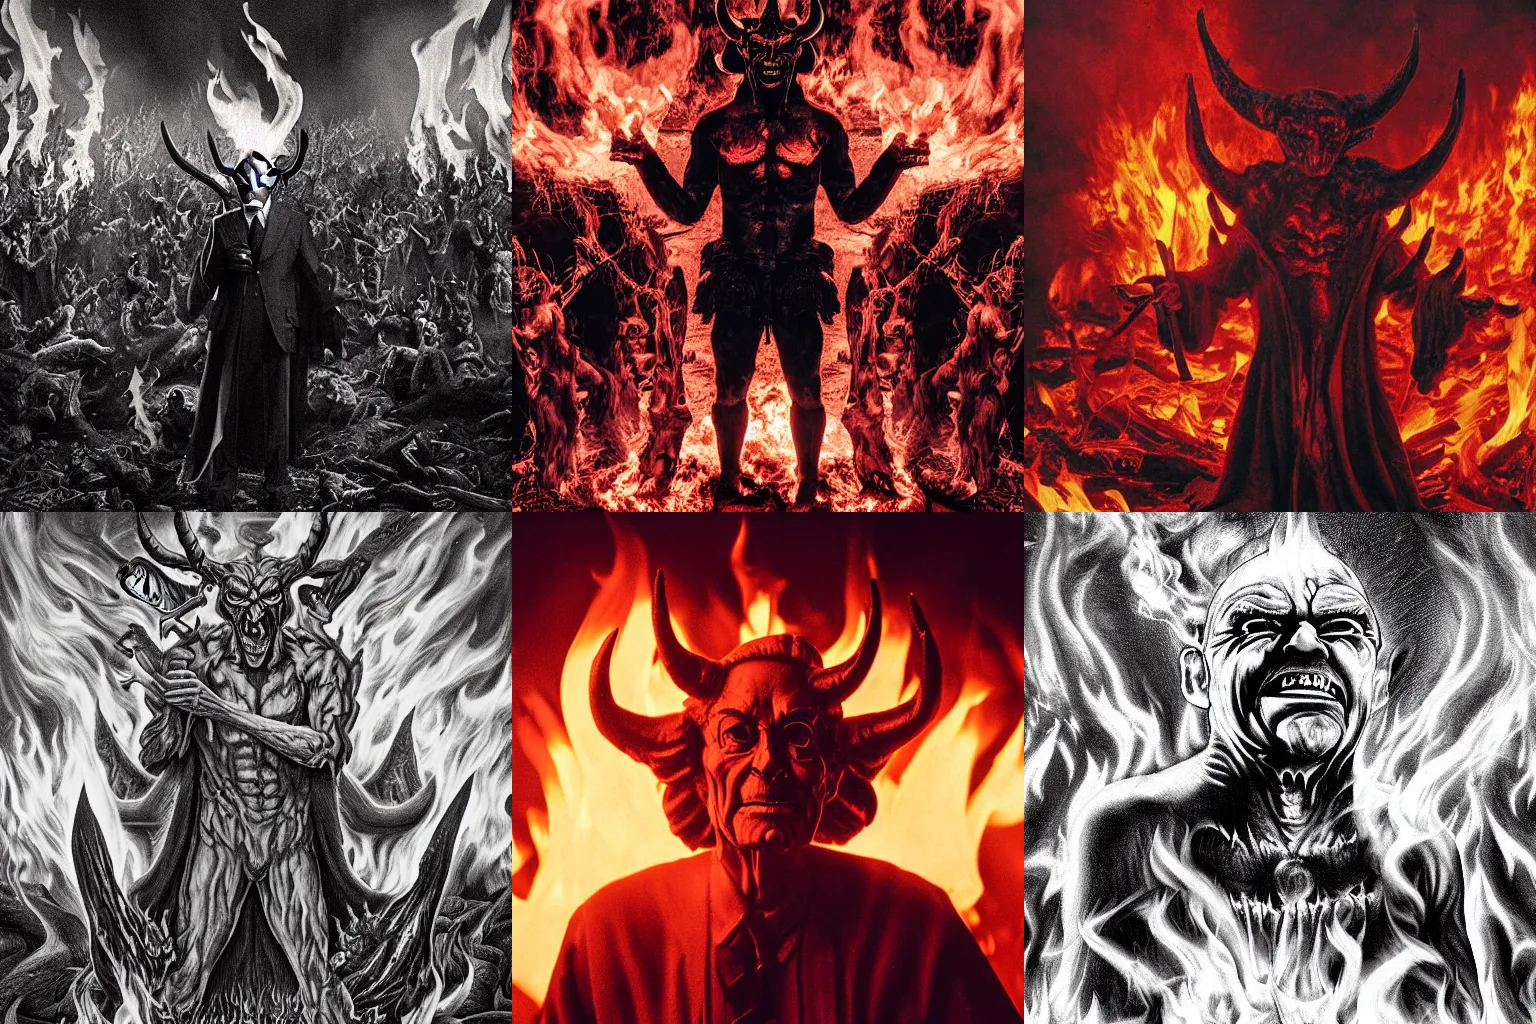 Prompt: The Devil with the head and face of Rupert Murdoch standing in front of his satanic army in hell, Rupert Murdoch, photo realistic, 35mm photograph, fire and flames and smoke, depth of field